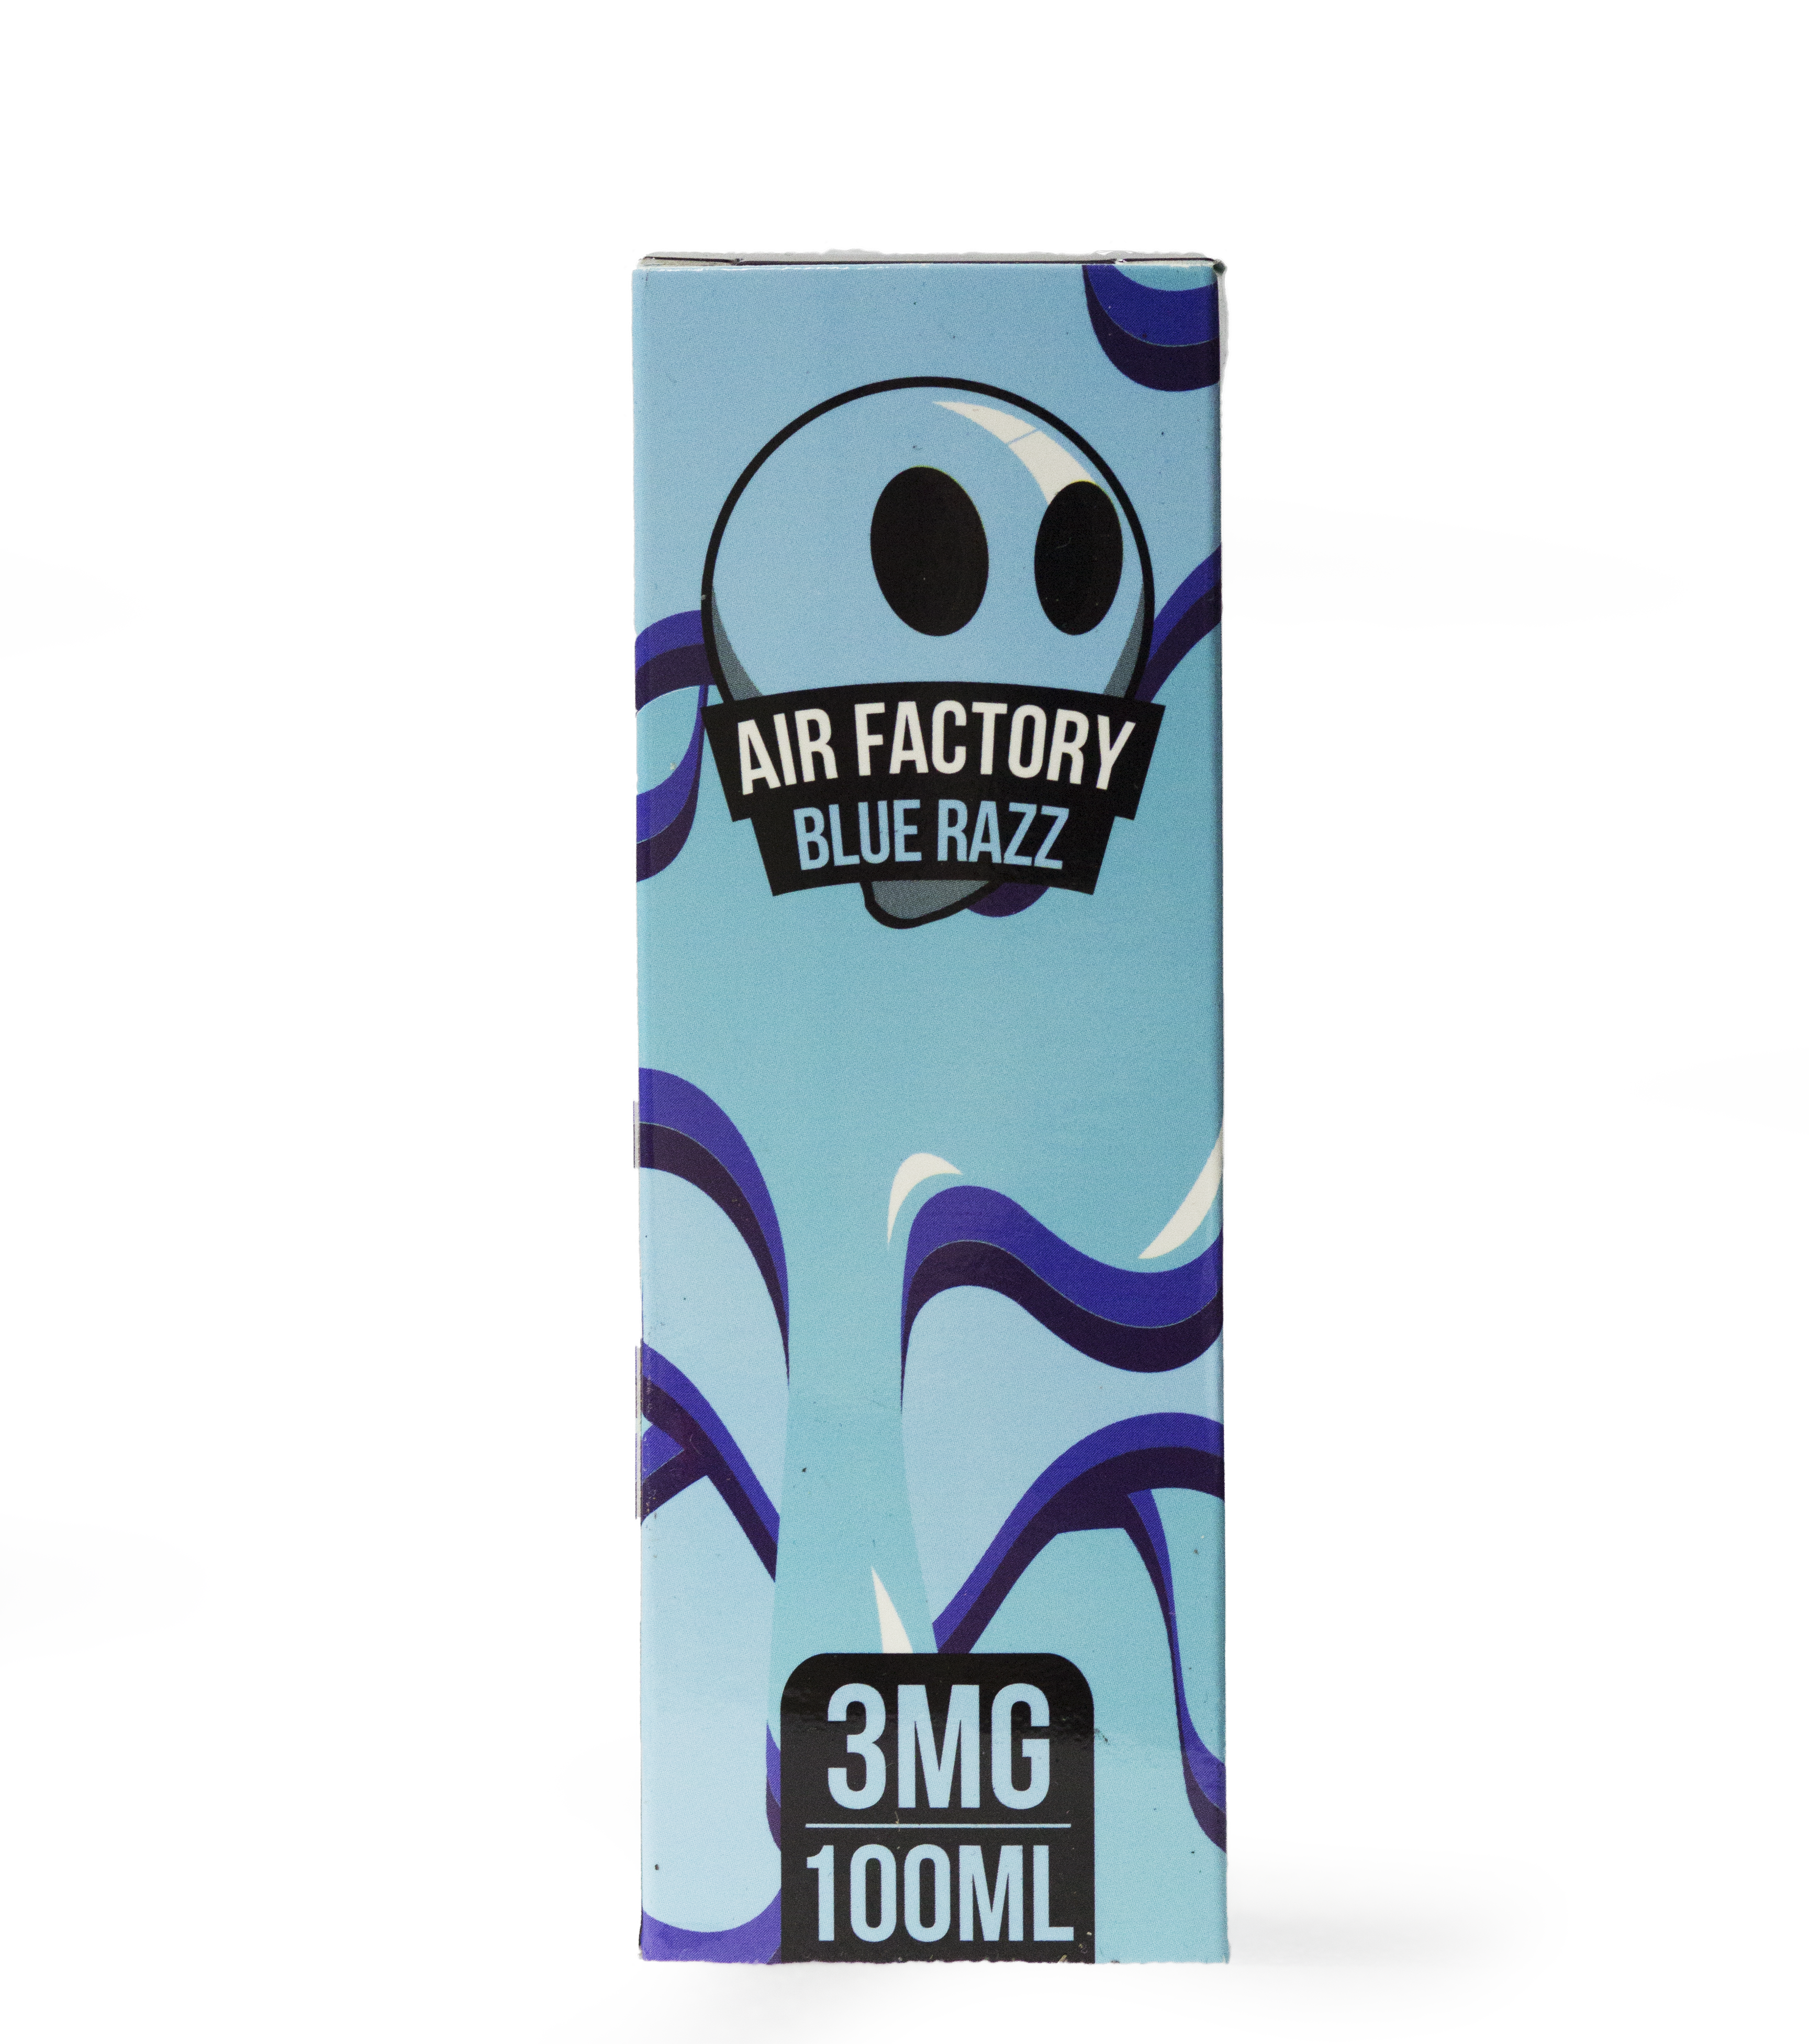 Get Your eJuice - Air Factory Blue Razz